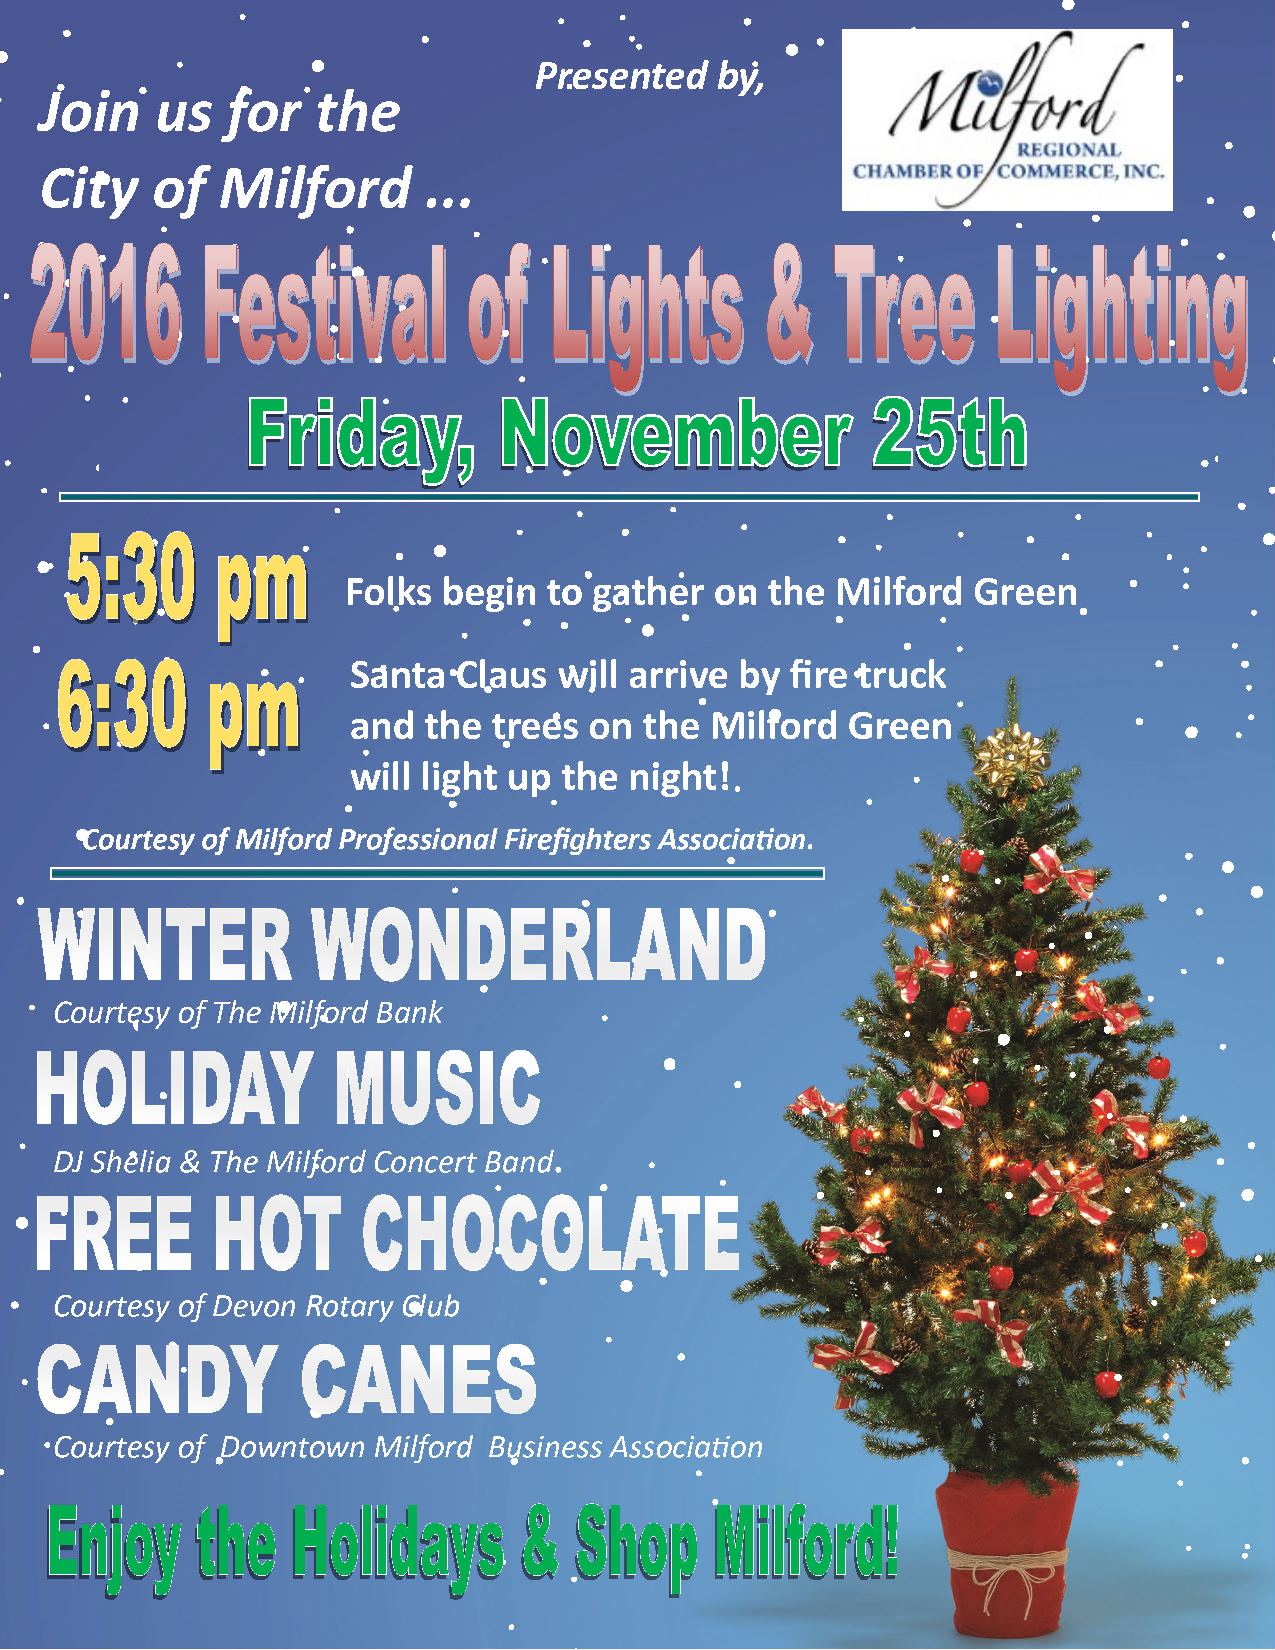 Annual Tree Lighting on the Milford Green